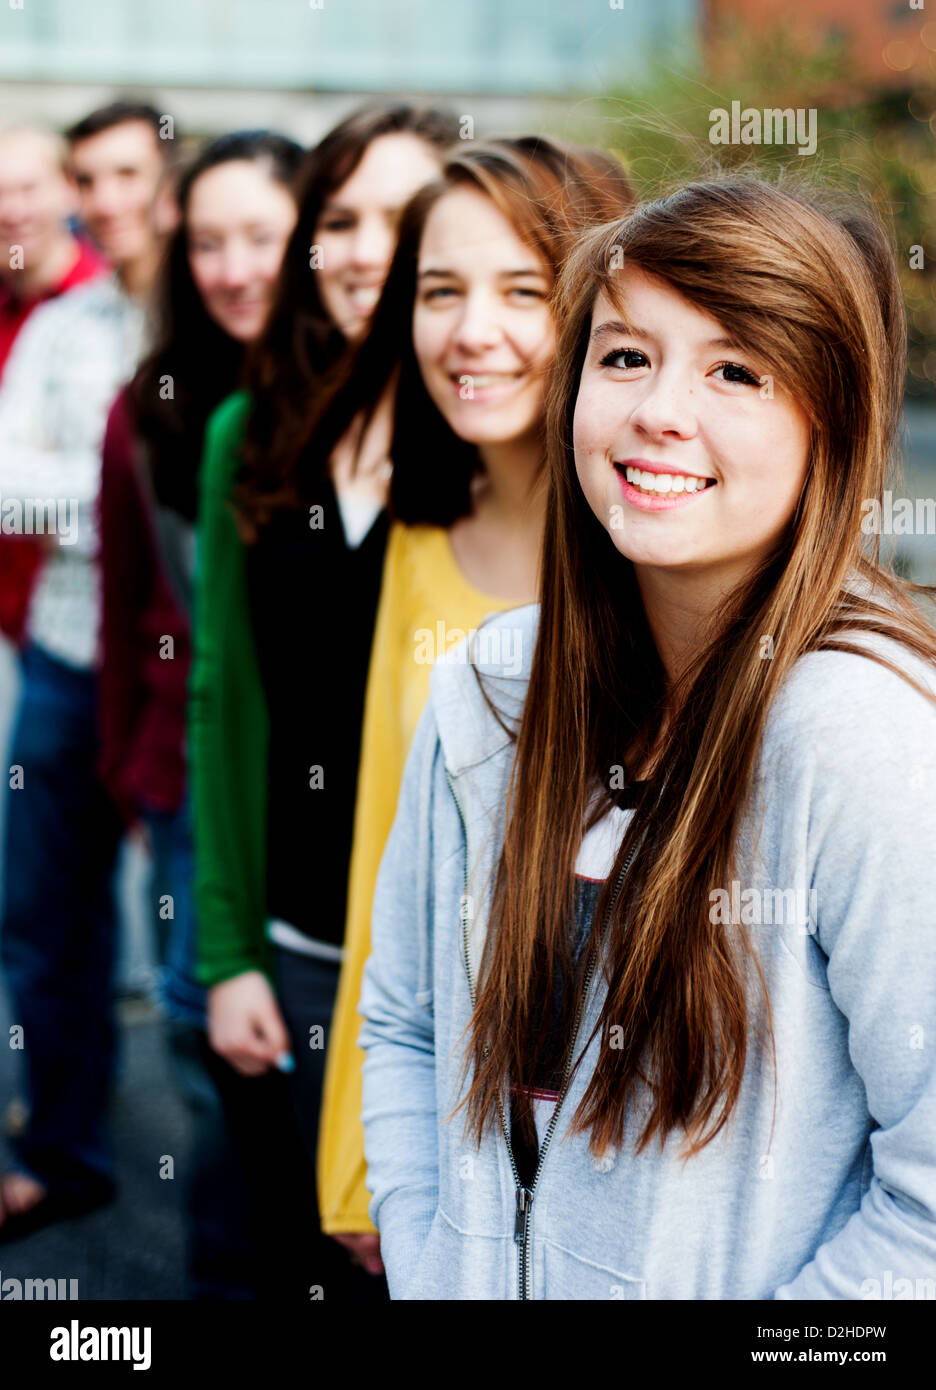 Friends or students outside in a row smiling Stock Photo